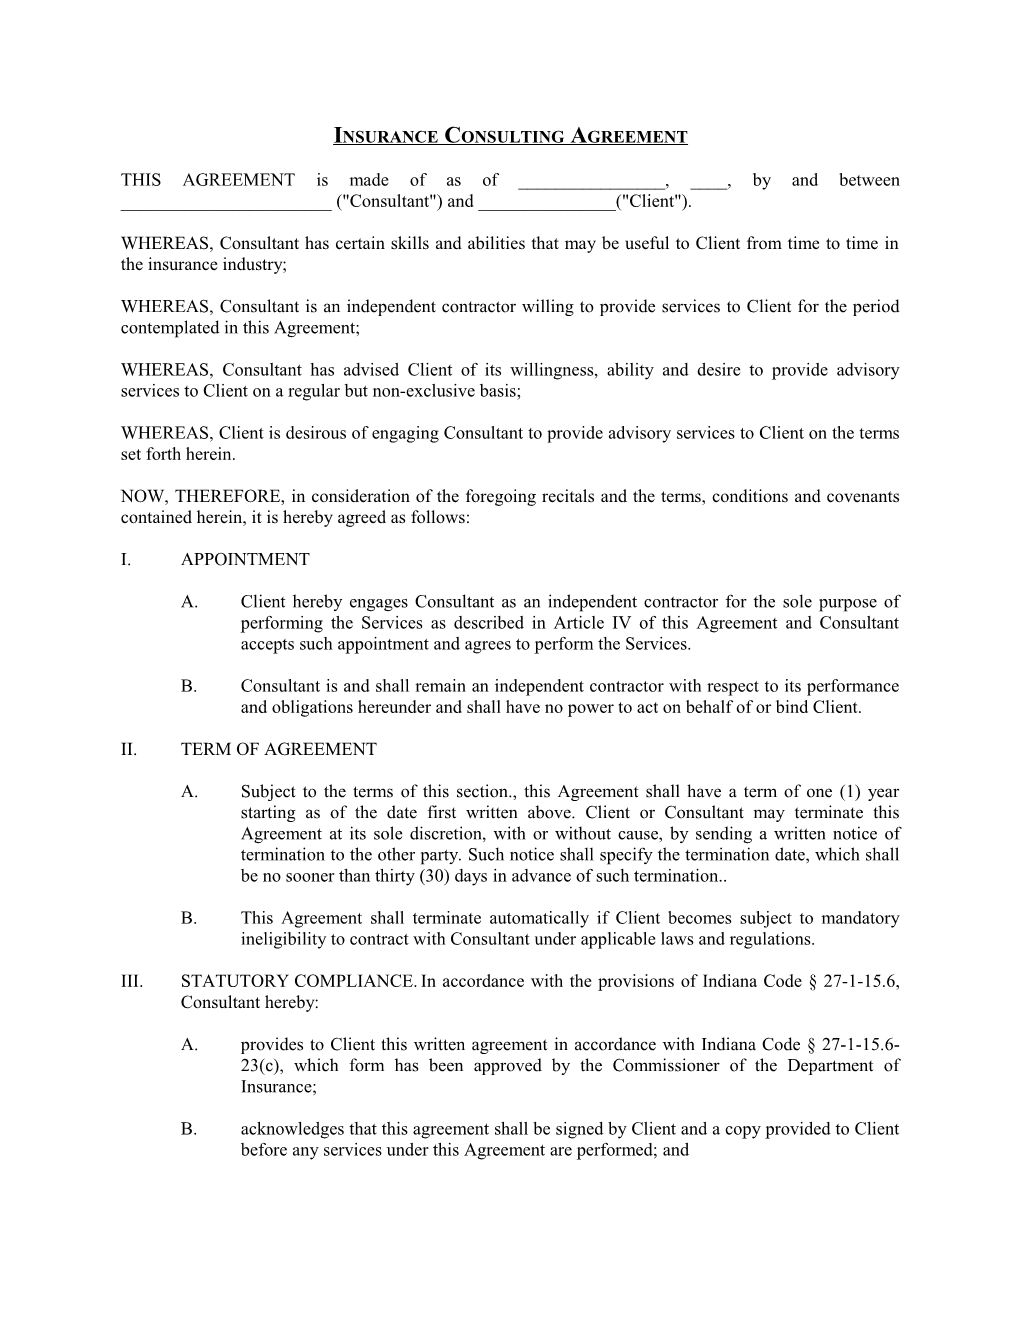 Insurance Consulting Agreement (Long Form)